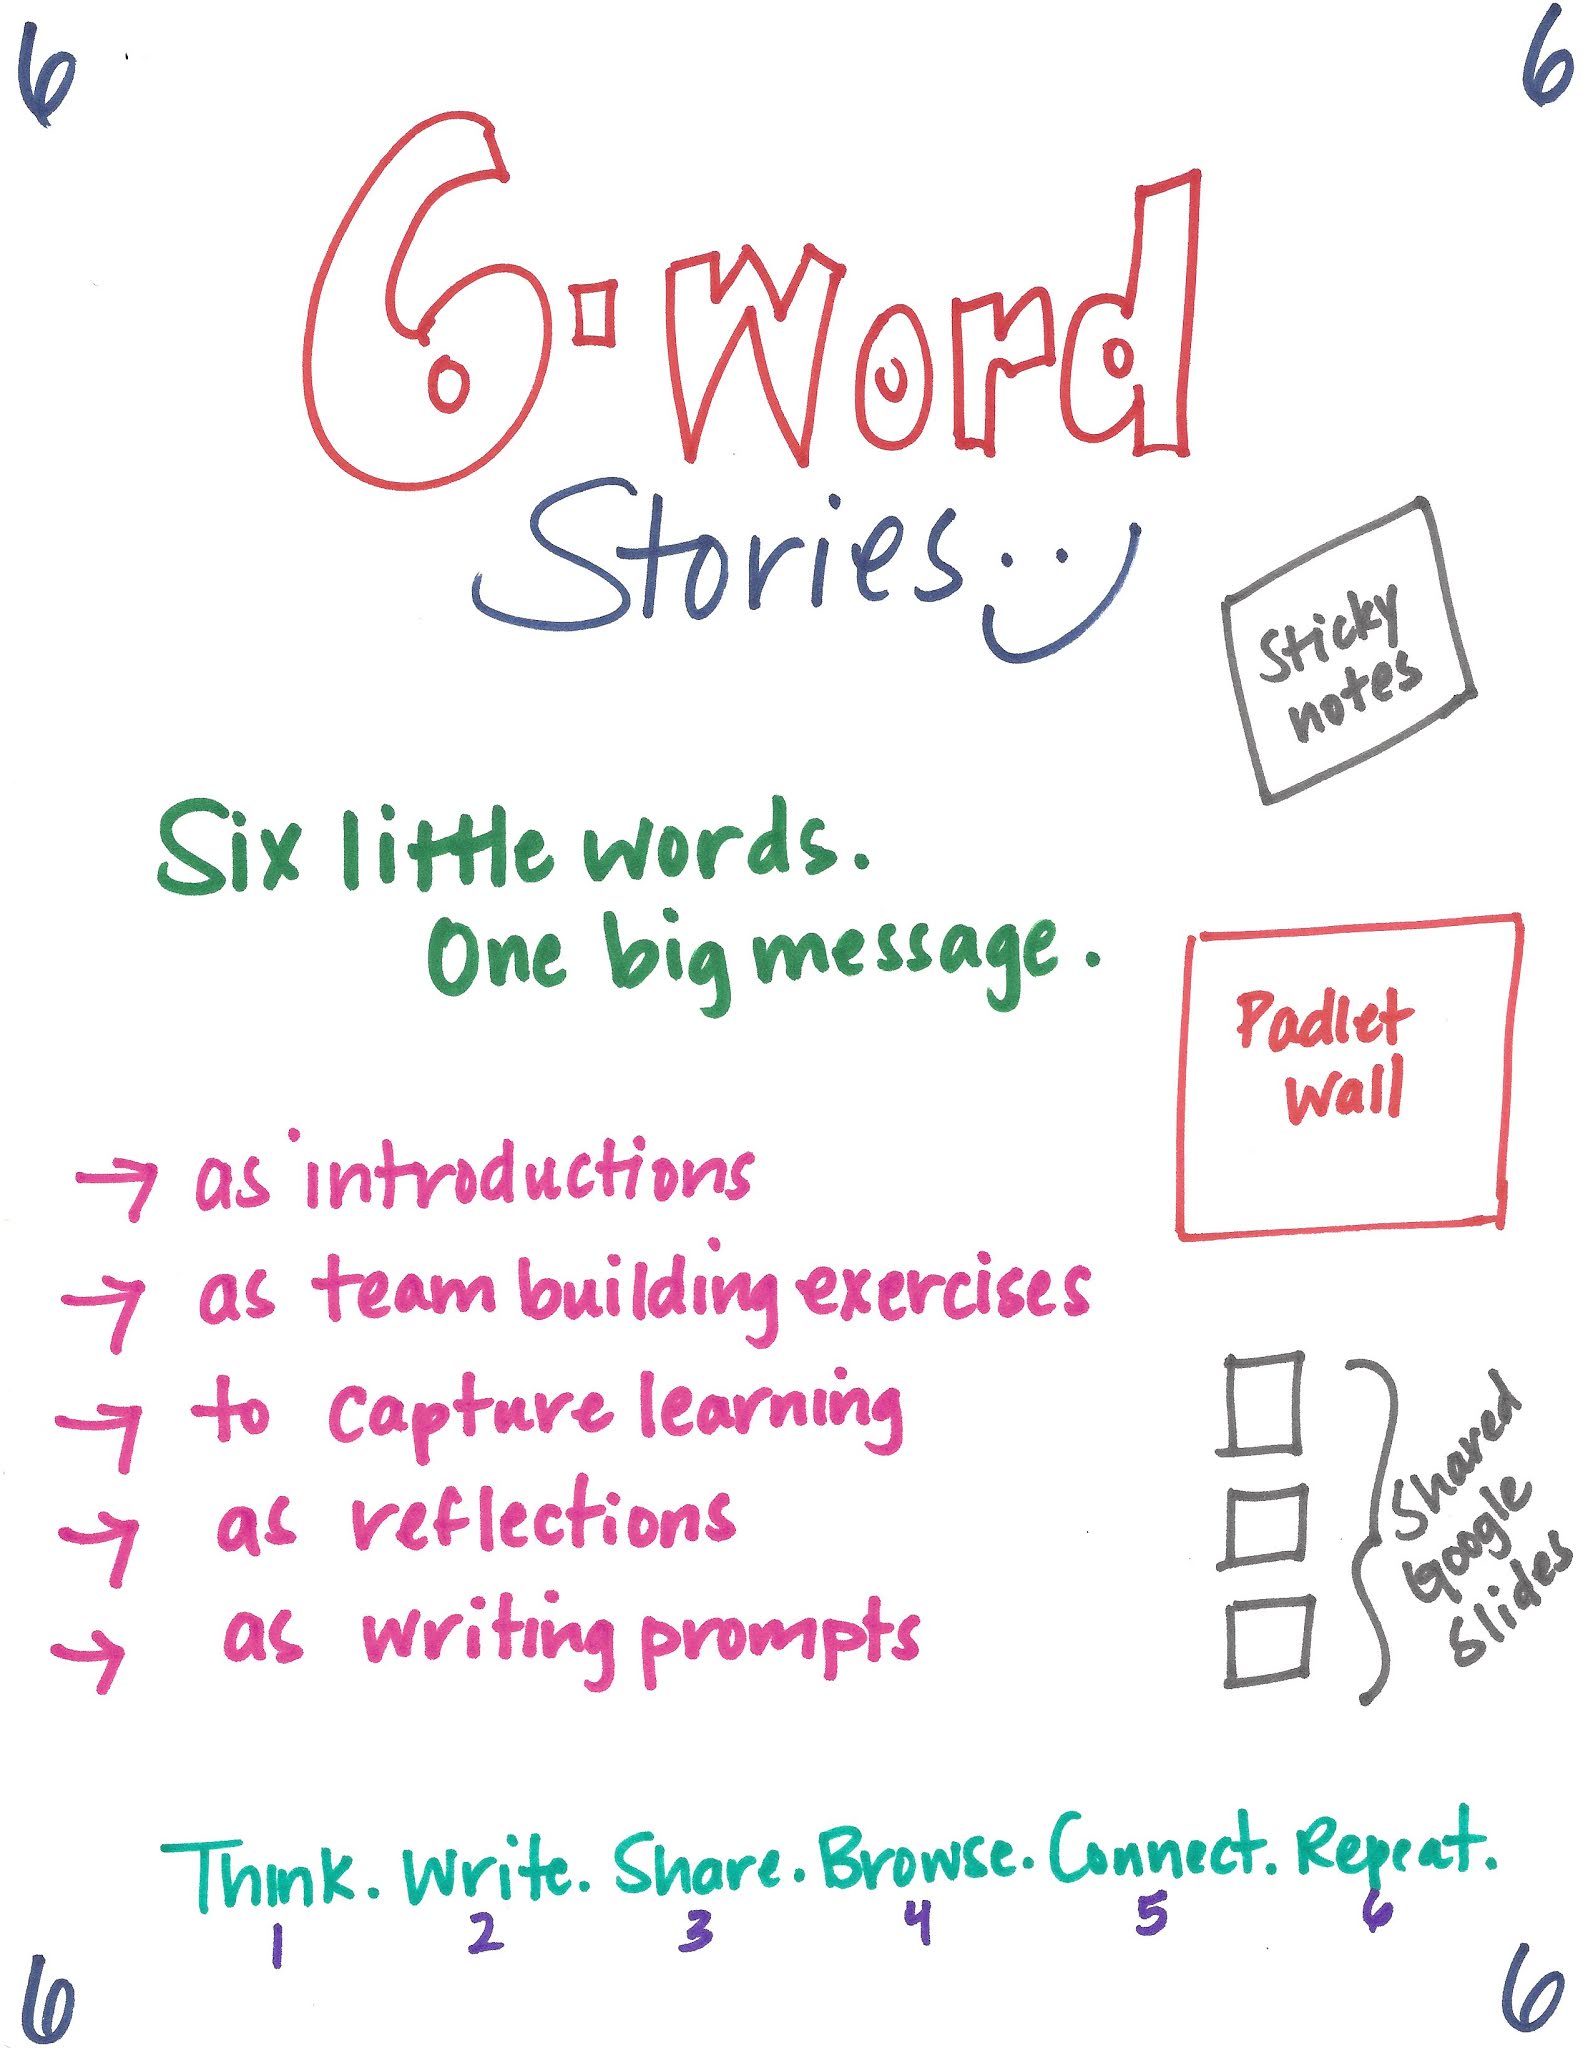 22-Word Stories in Coaching  The Coaching Sketchnote Book with Dr